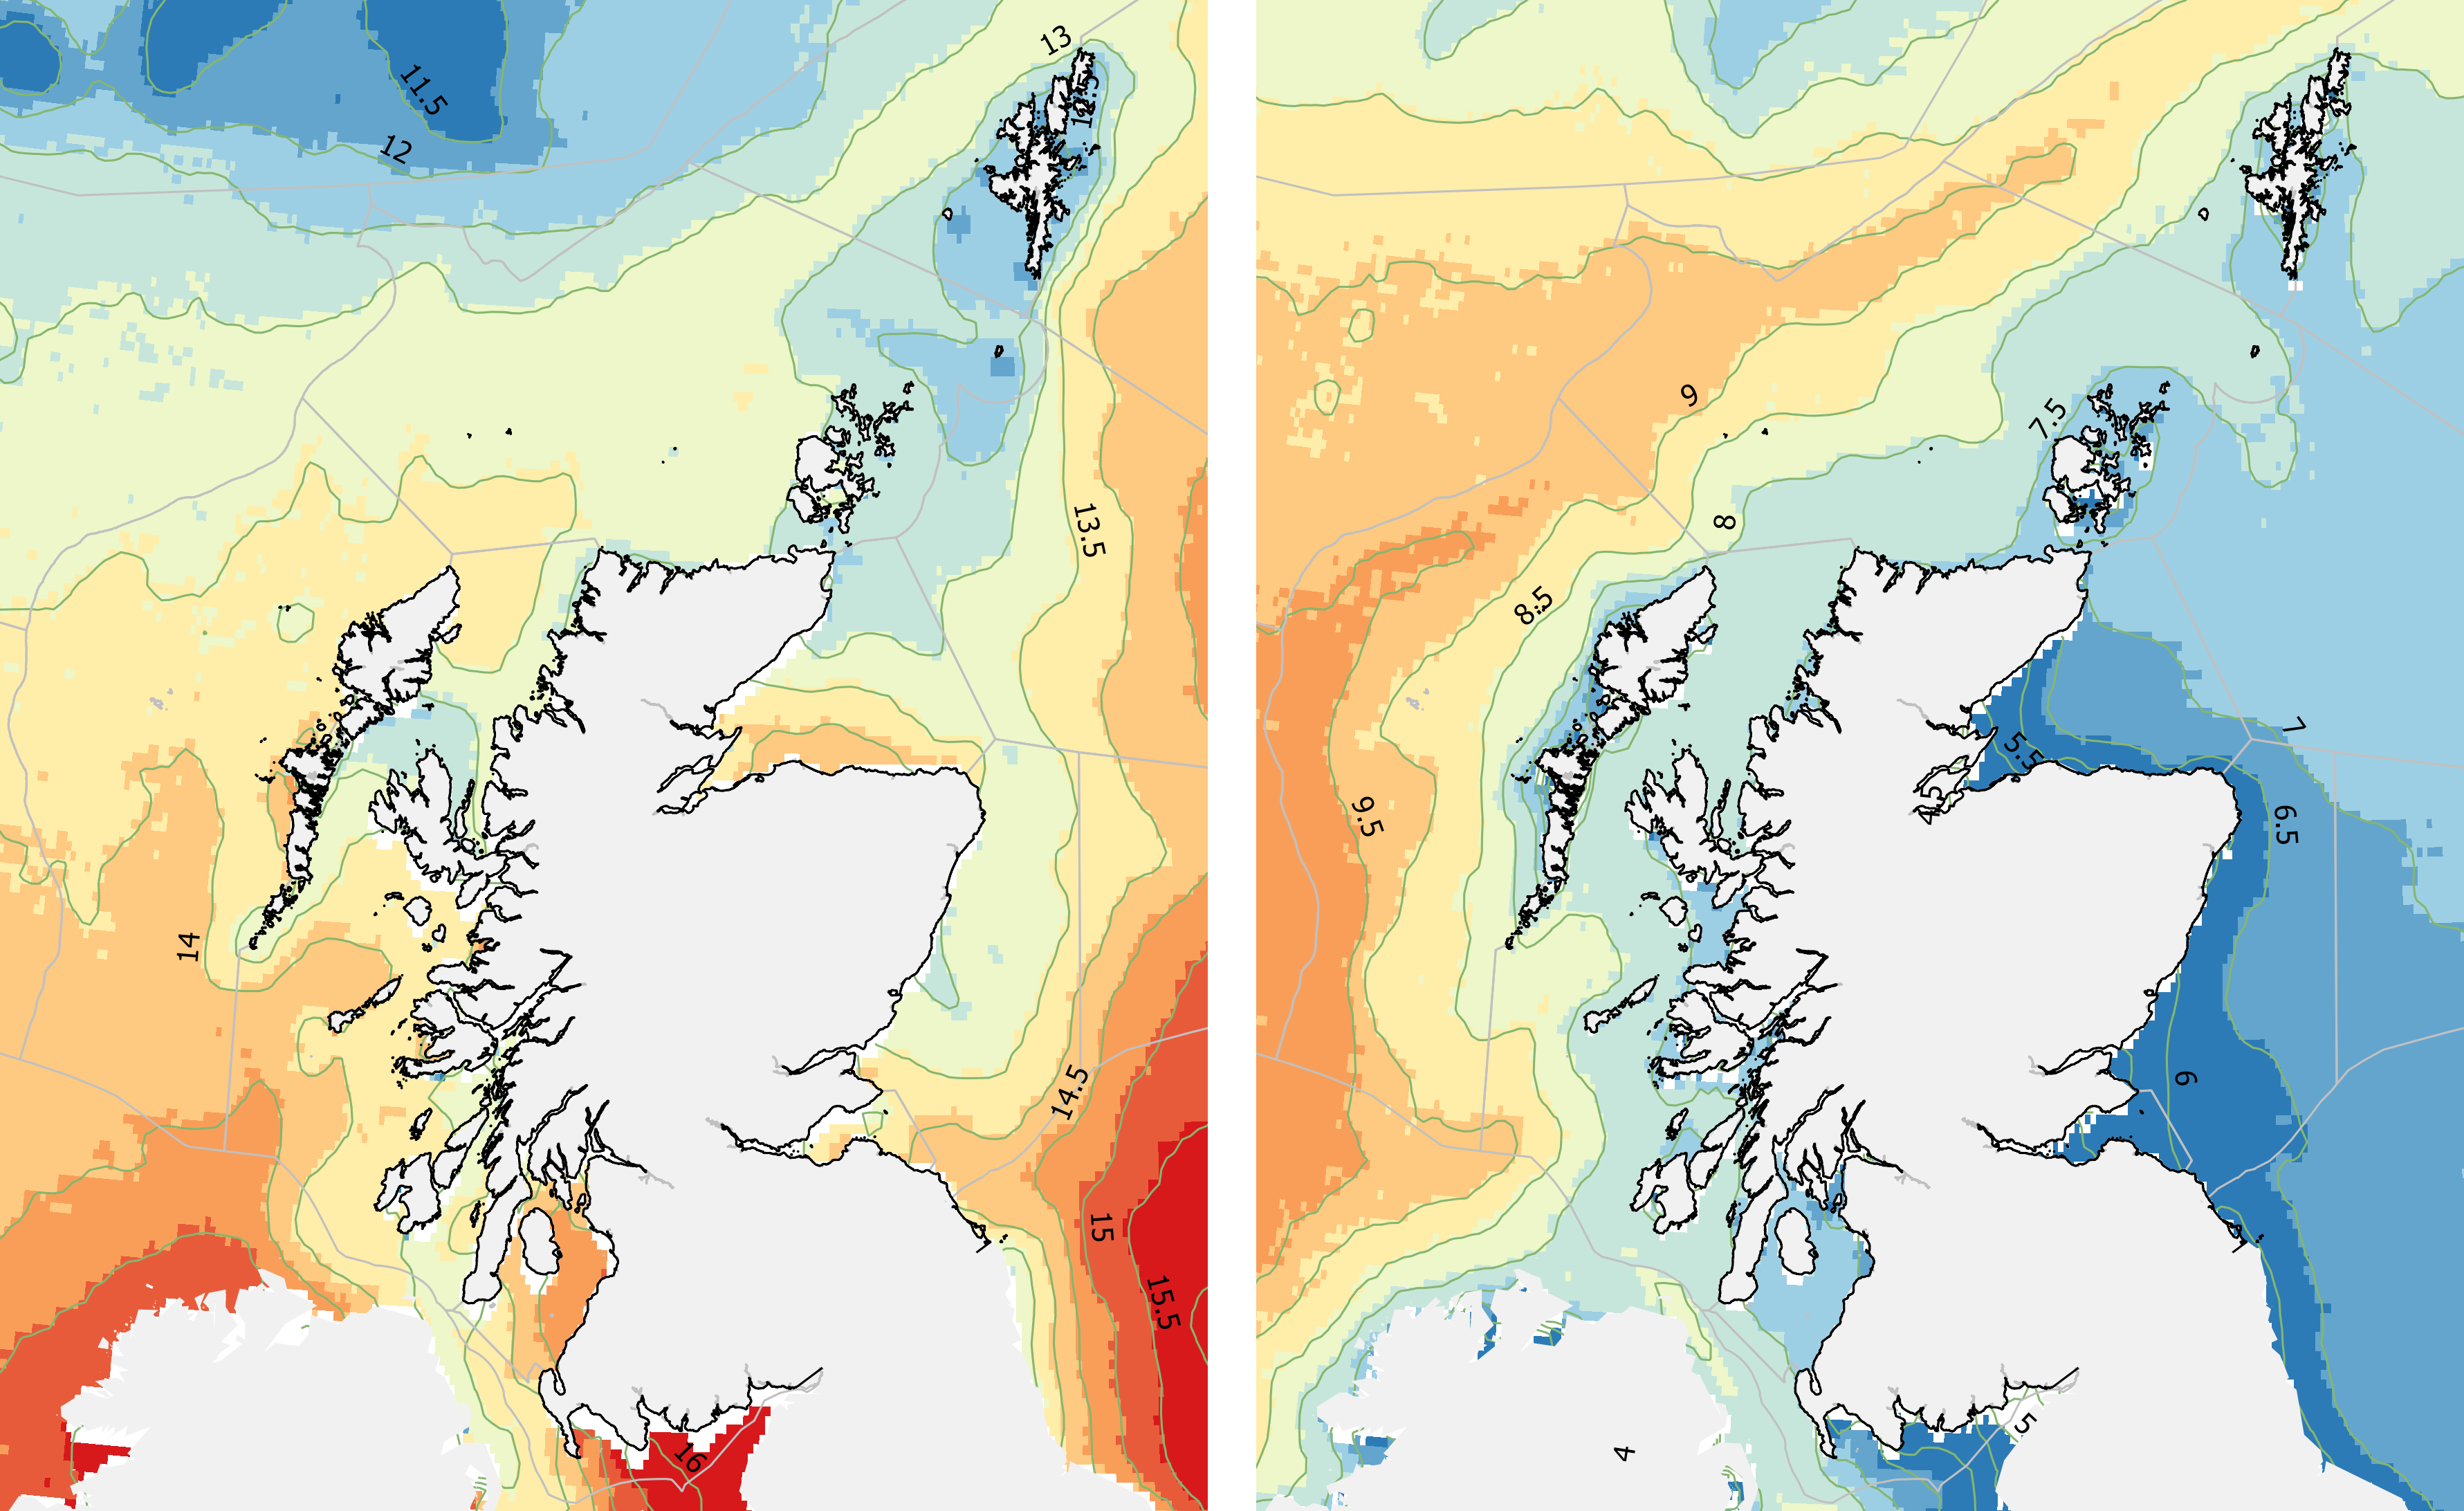 Sea surface temperature: (left) August 1982-2018 average, (right) February 1982- 2018 average (Data: NOAA OISST V2 HR daily 4km SST). Contours show 0.5°C intervals